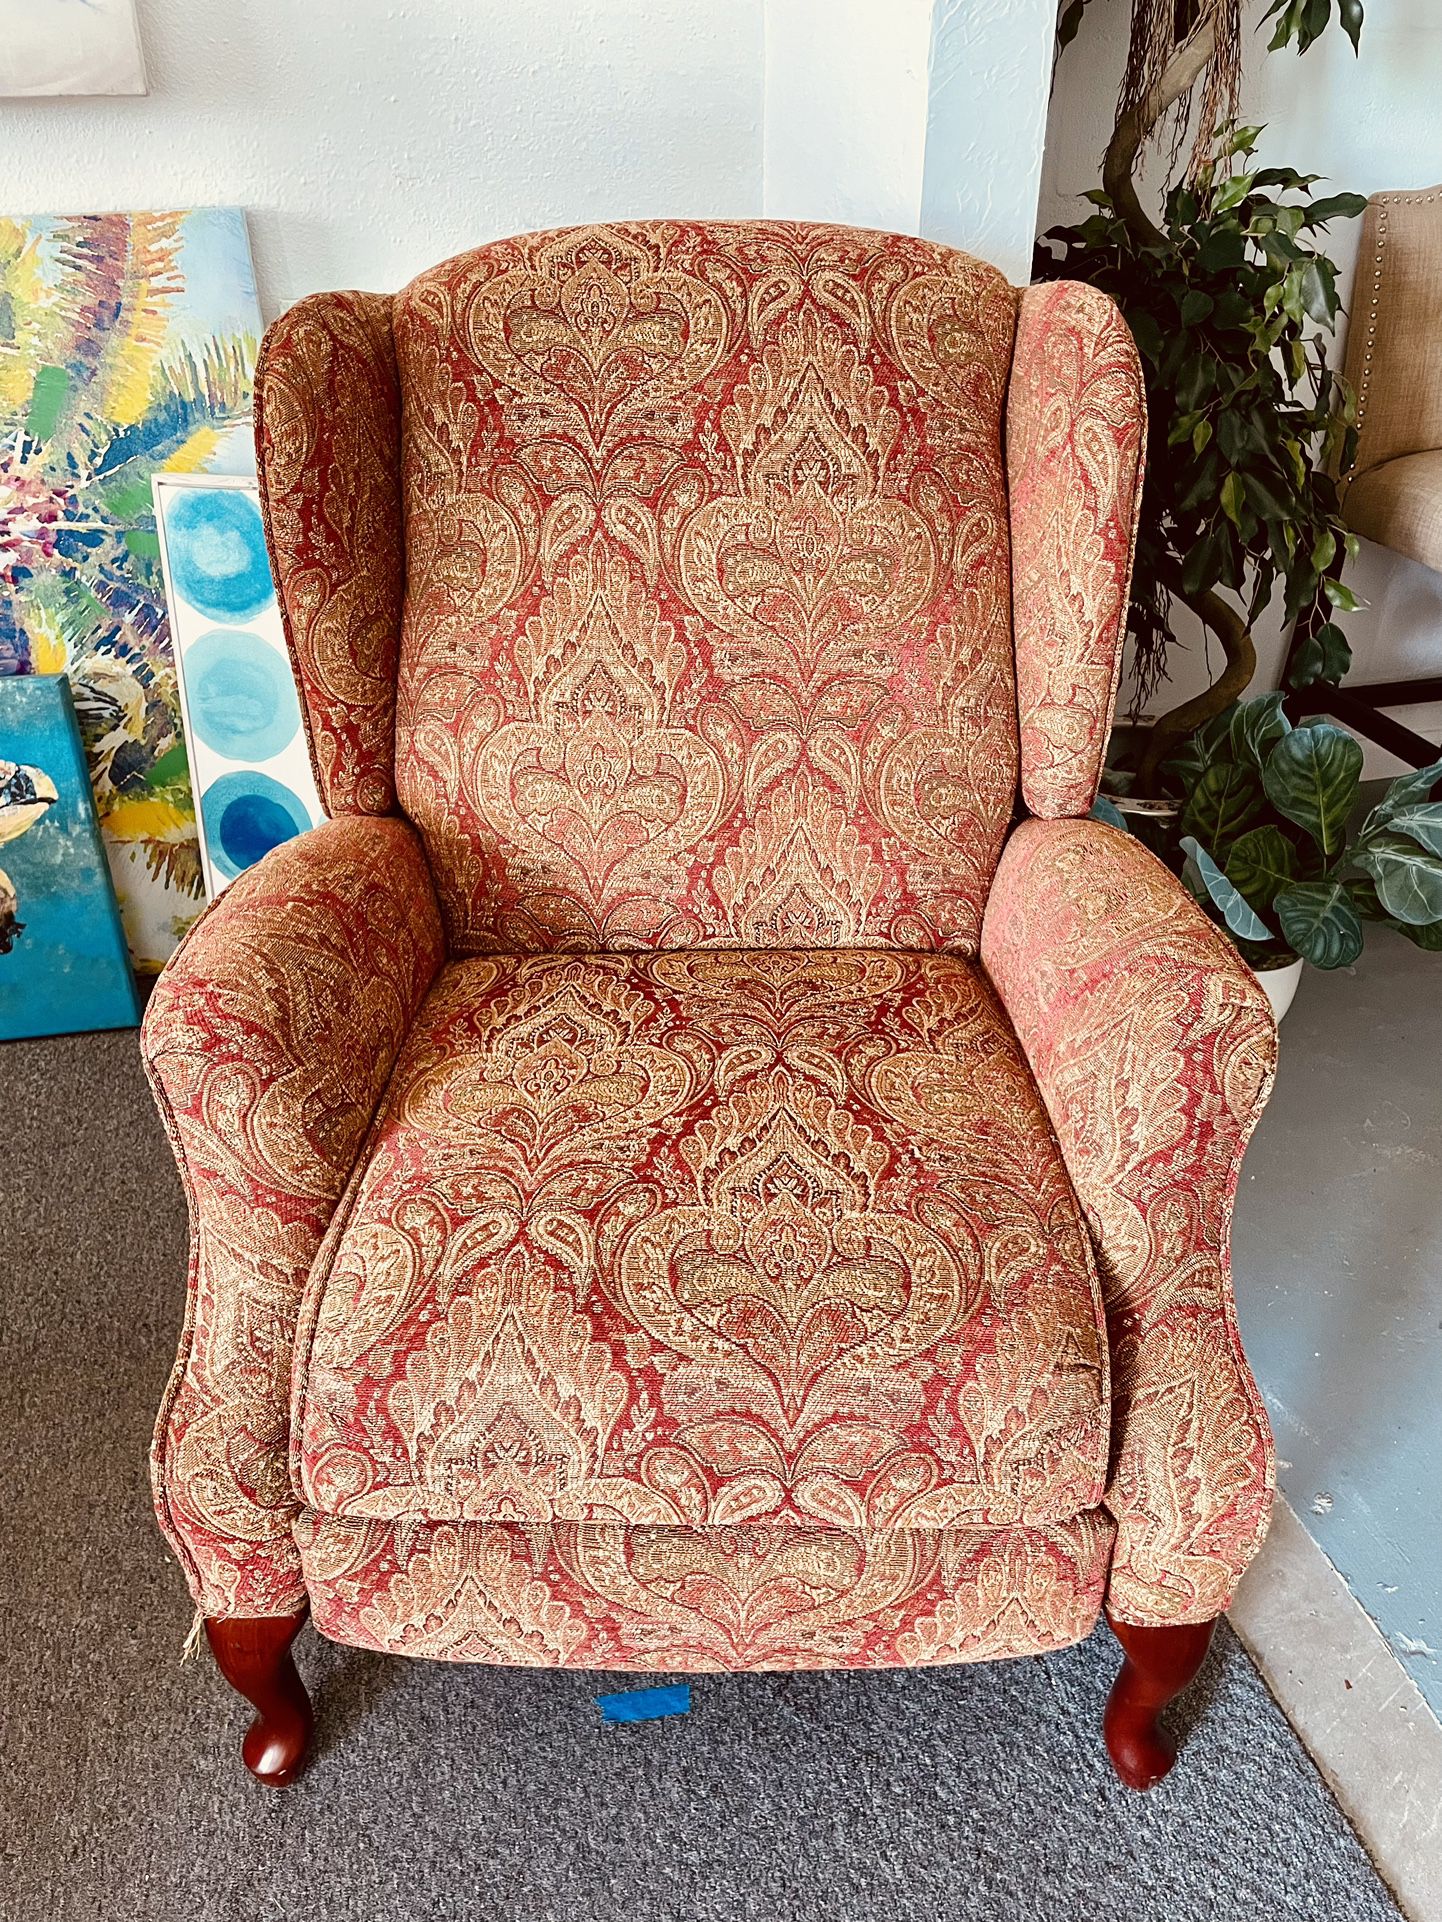 Beautiful Red Fabric Pattern Recliner - Works Well & Very Good Condition 